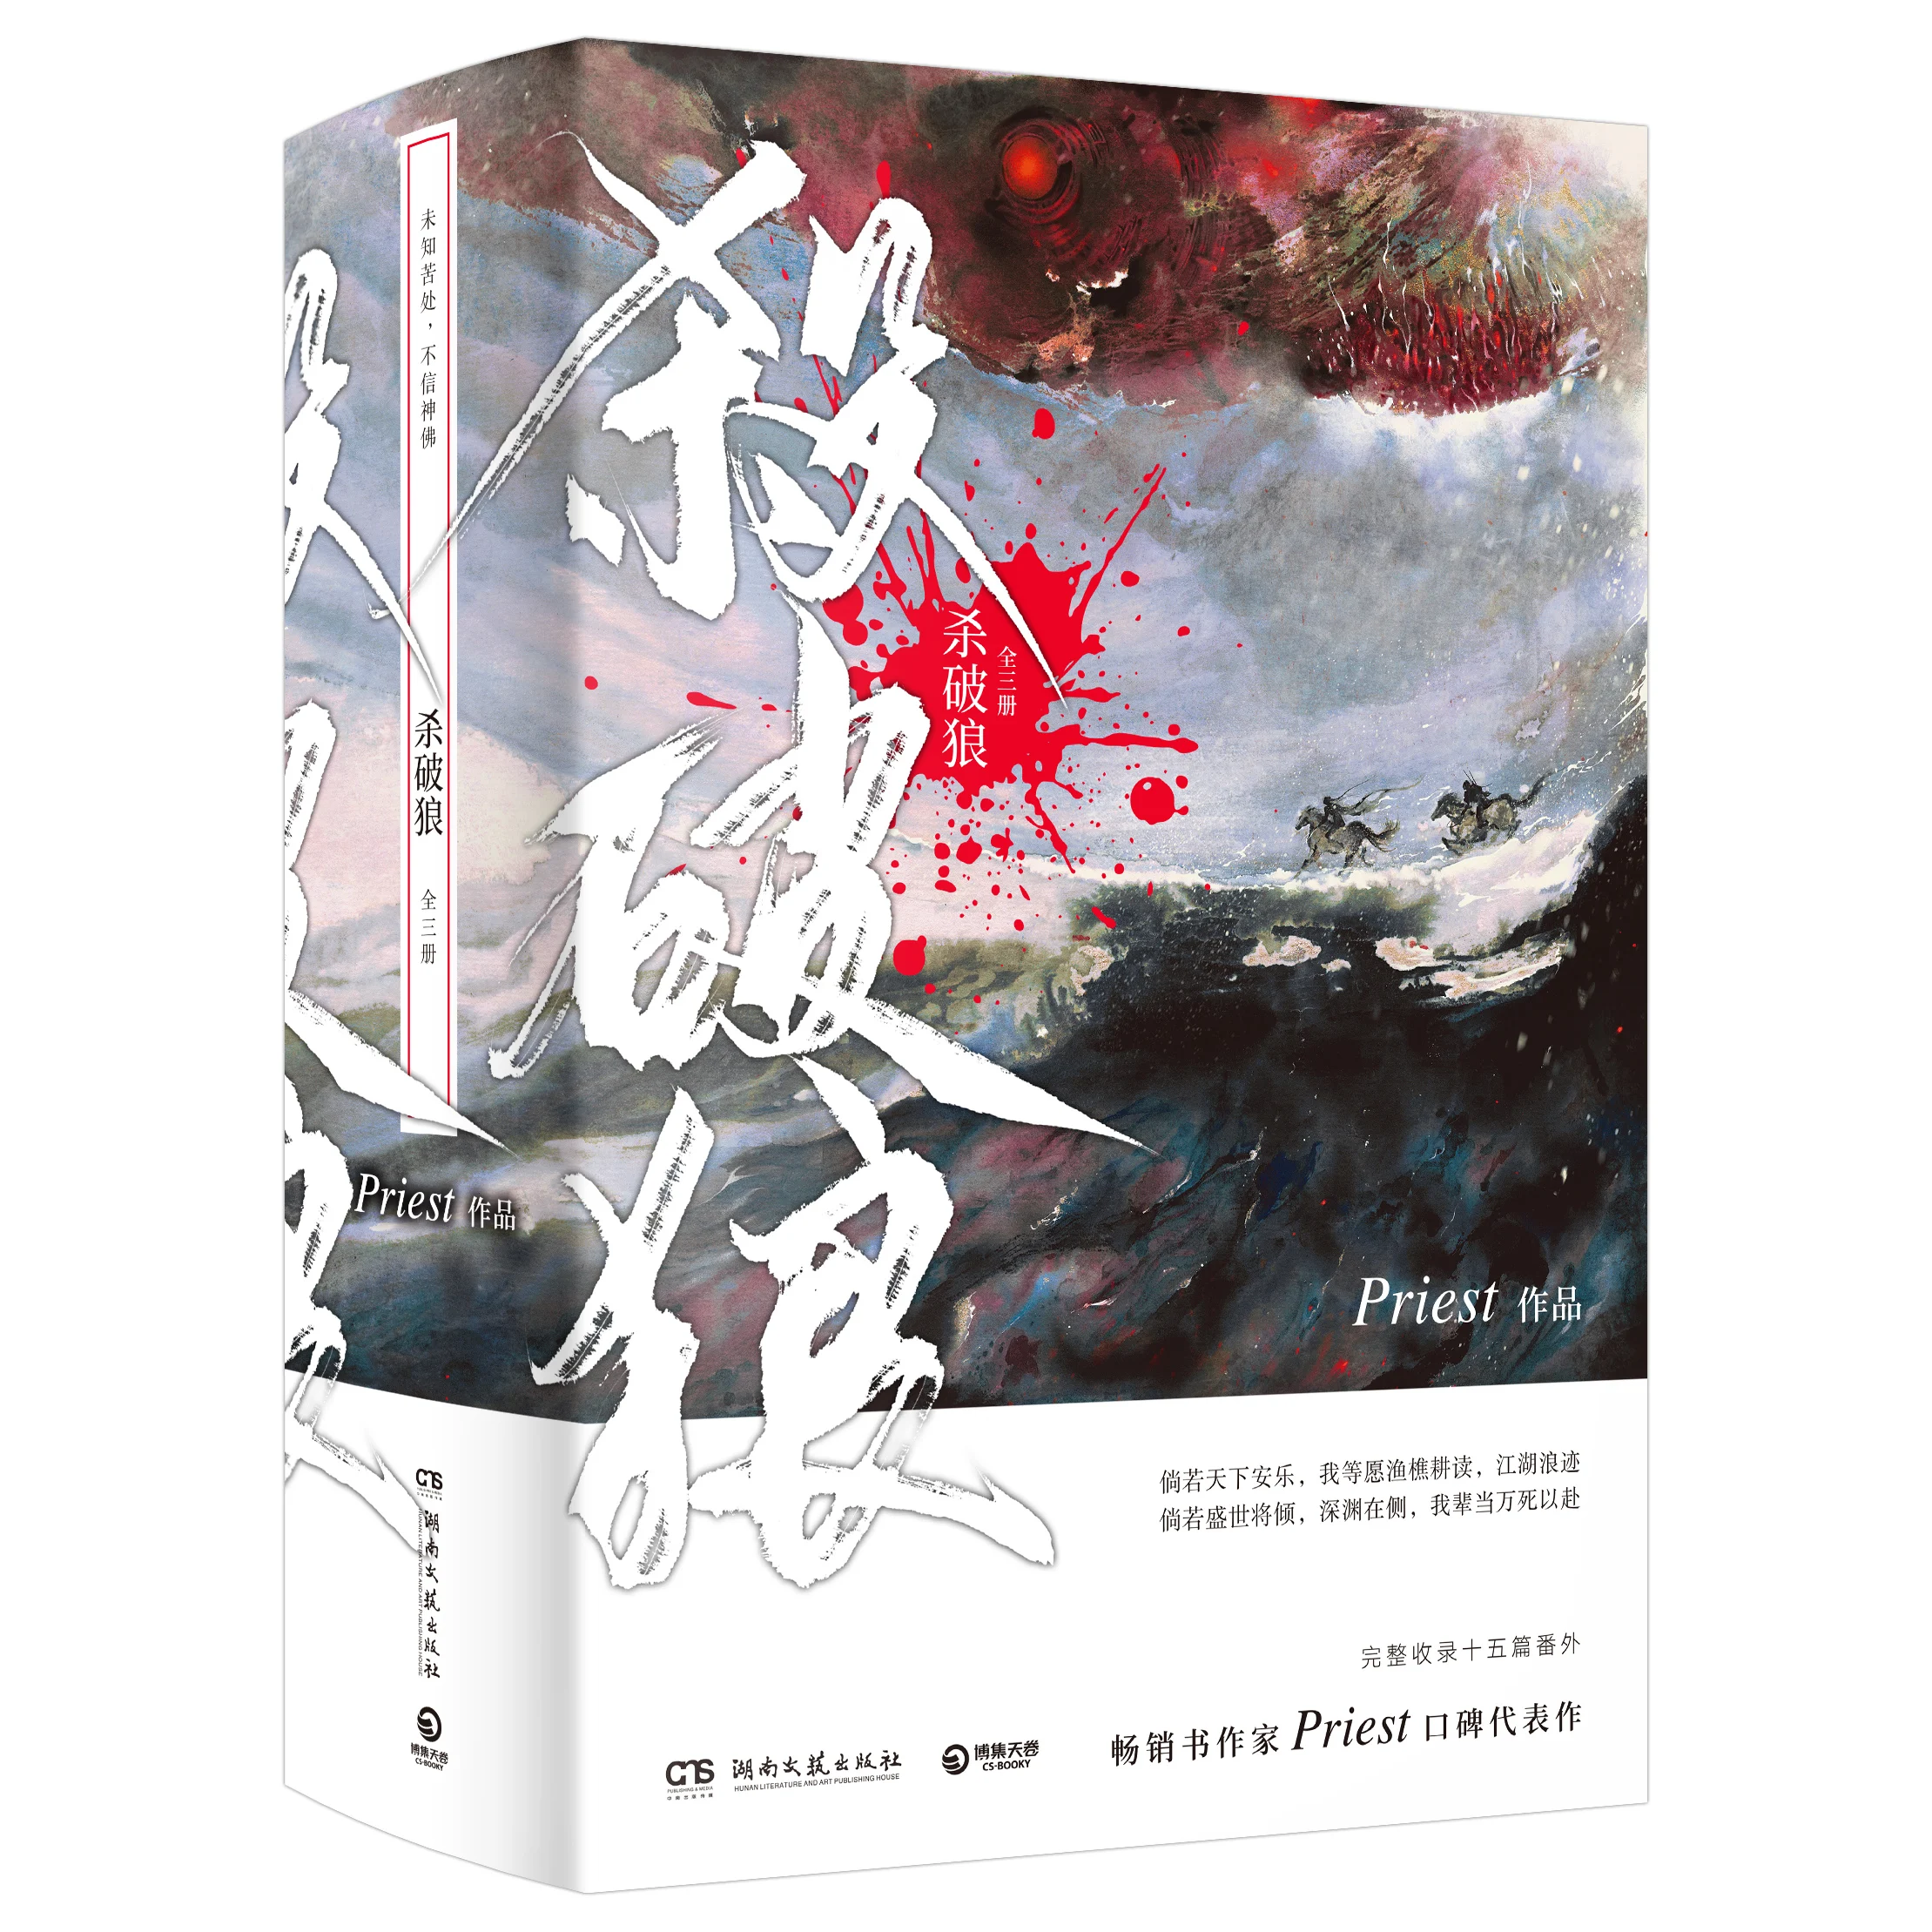 3 Book/Set Sha Po Lang Novel by Priest Chivalrous Fantasy Martial Arts Fiction Books Chinese Edition